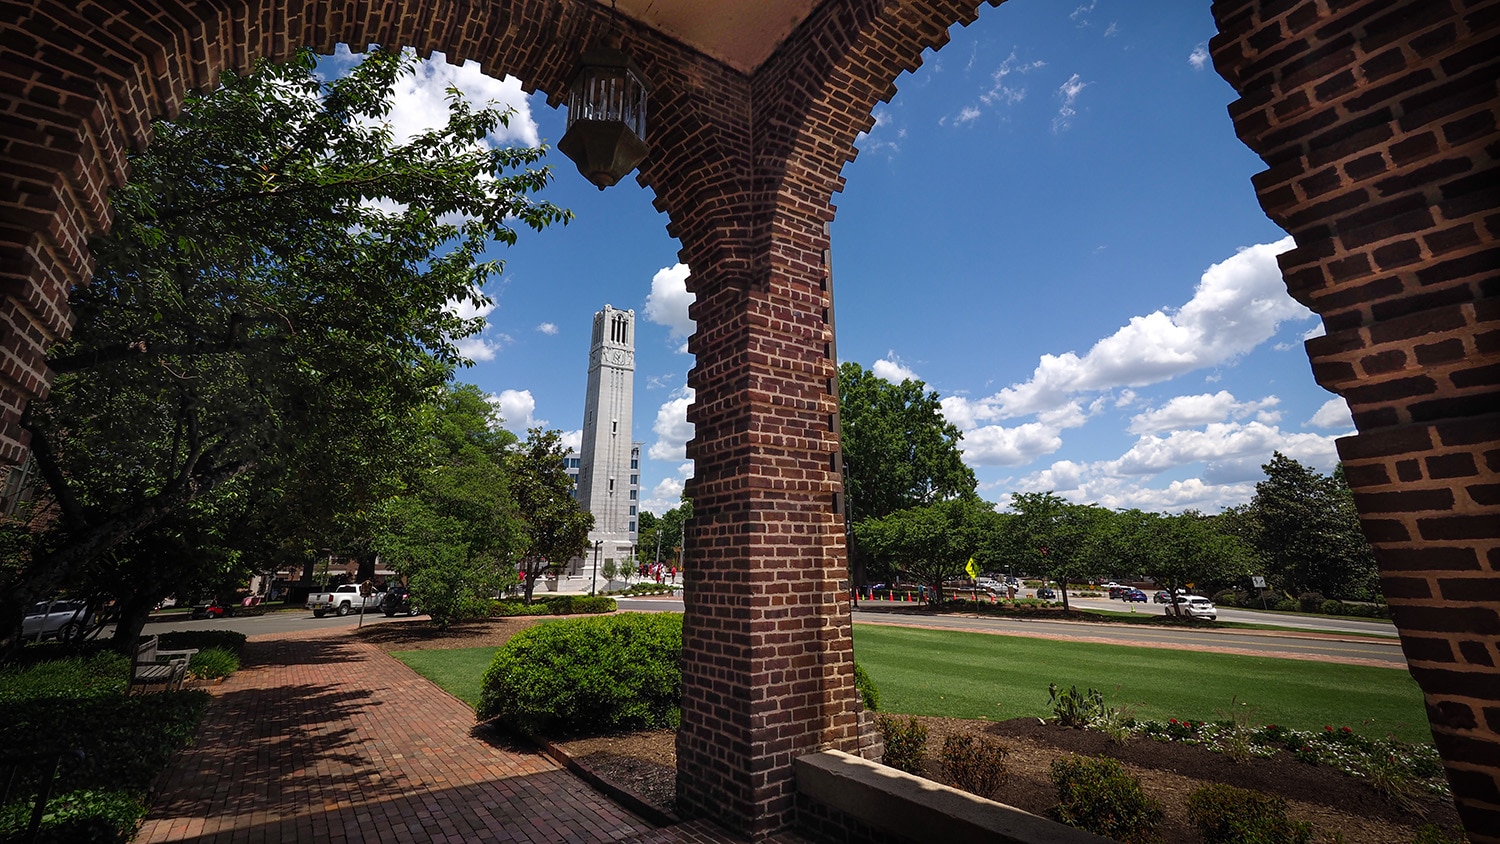 The Belltower as seen from porch of Holladay Hall